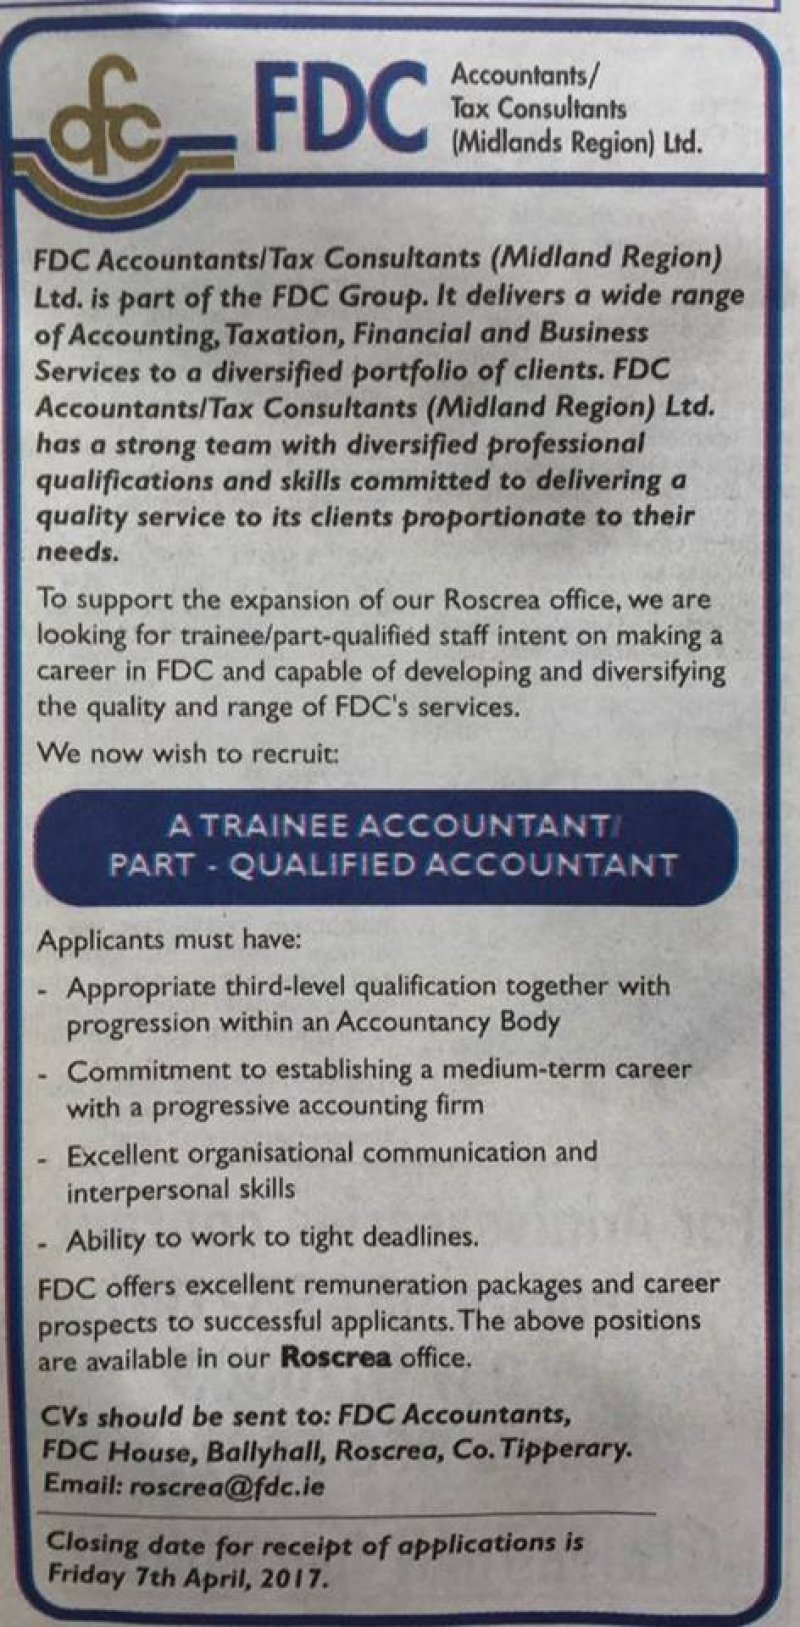 Midland Time Trainee Accountant, Part Qualified Accountant